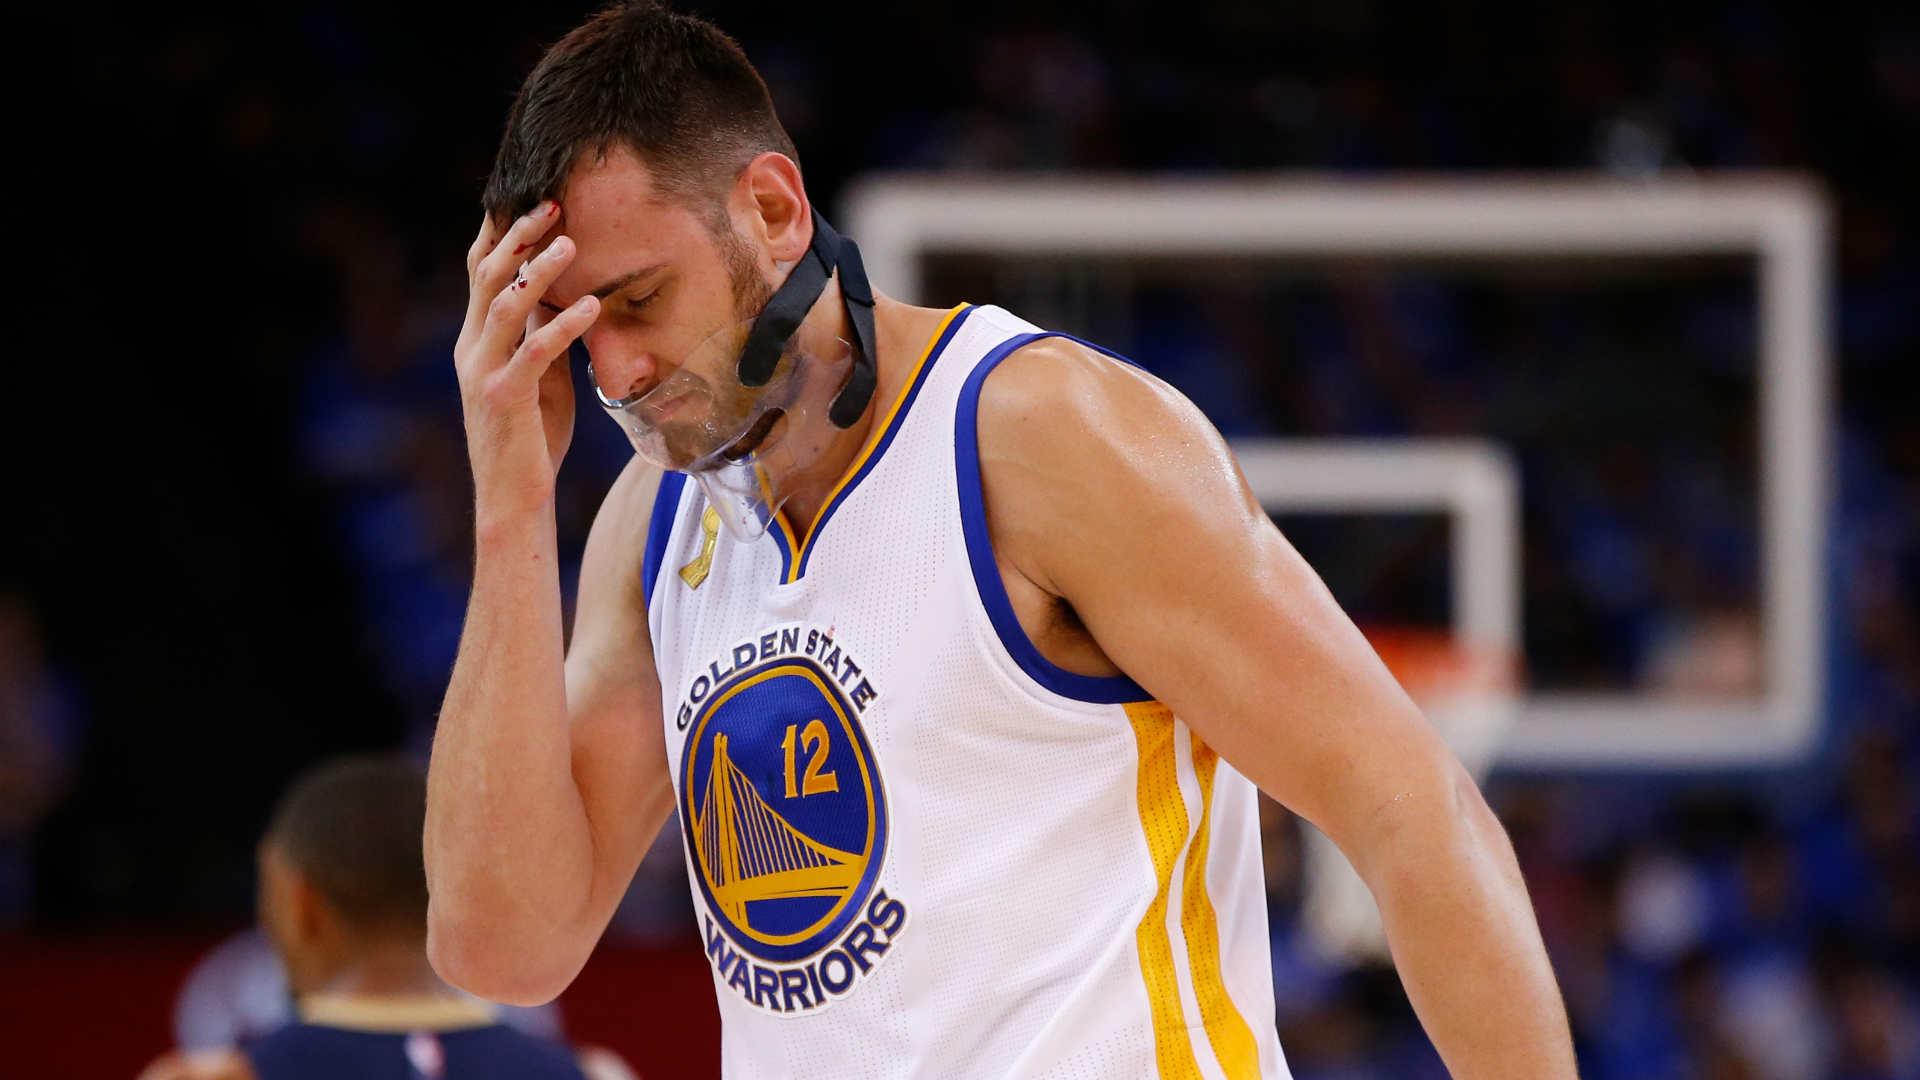 Warriors' Andrew Bogut diagnosed with concussion, could miss time